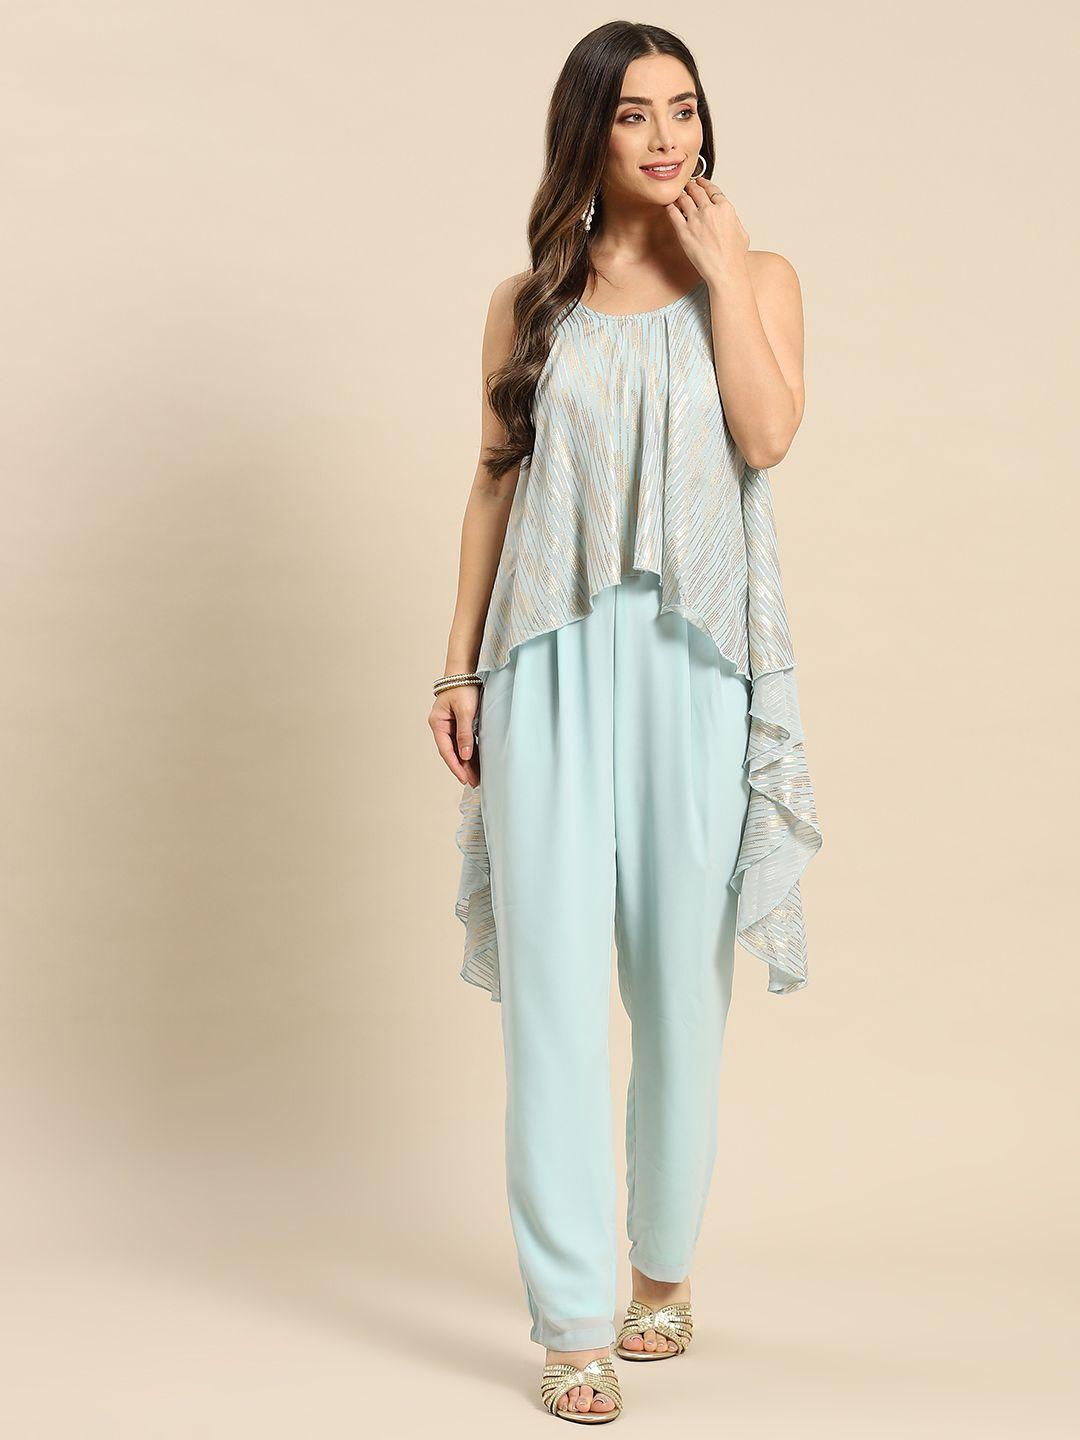 mabish by sonal jain blue printed basic jumpsuit with layered